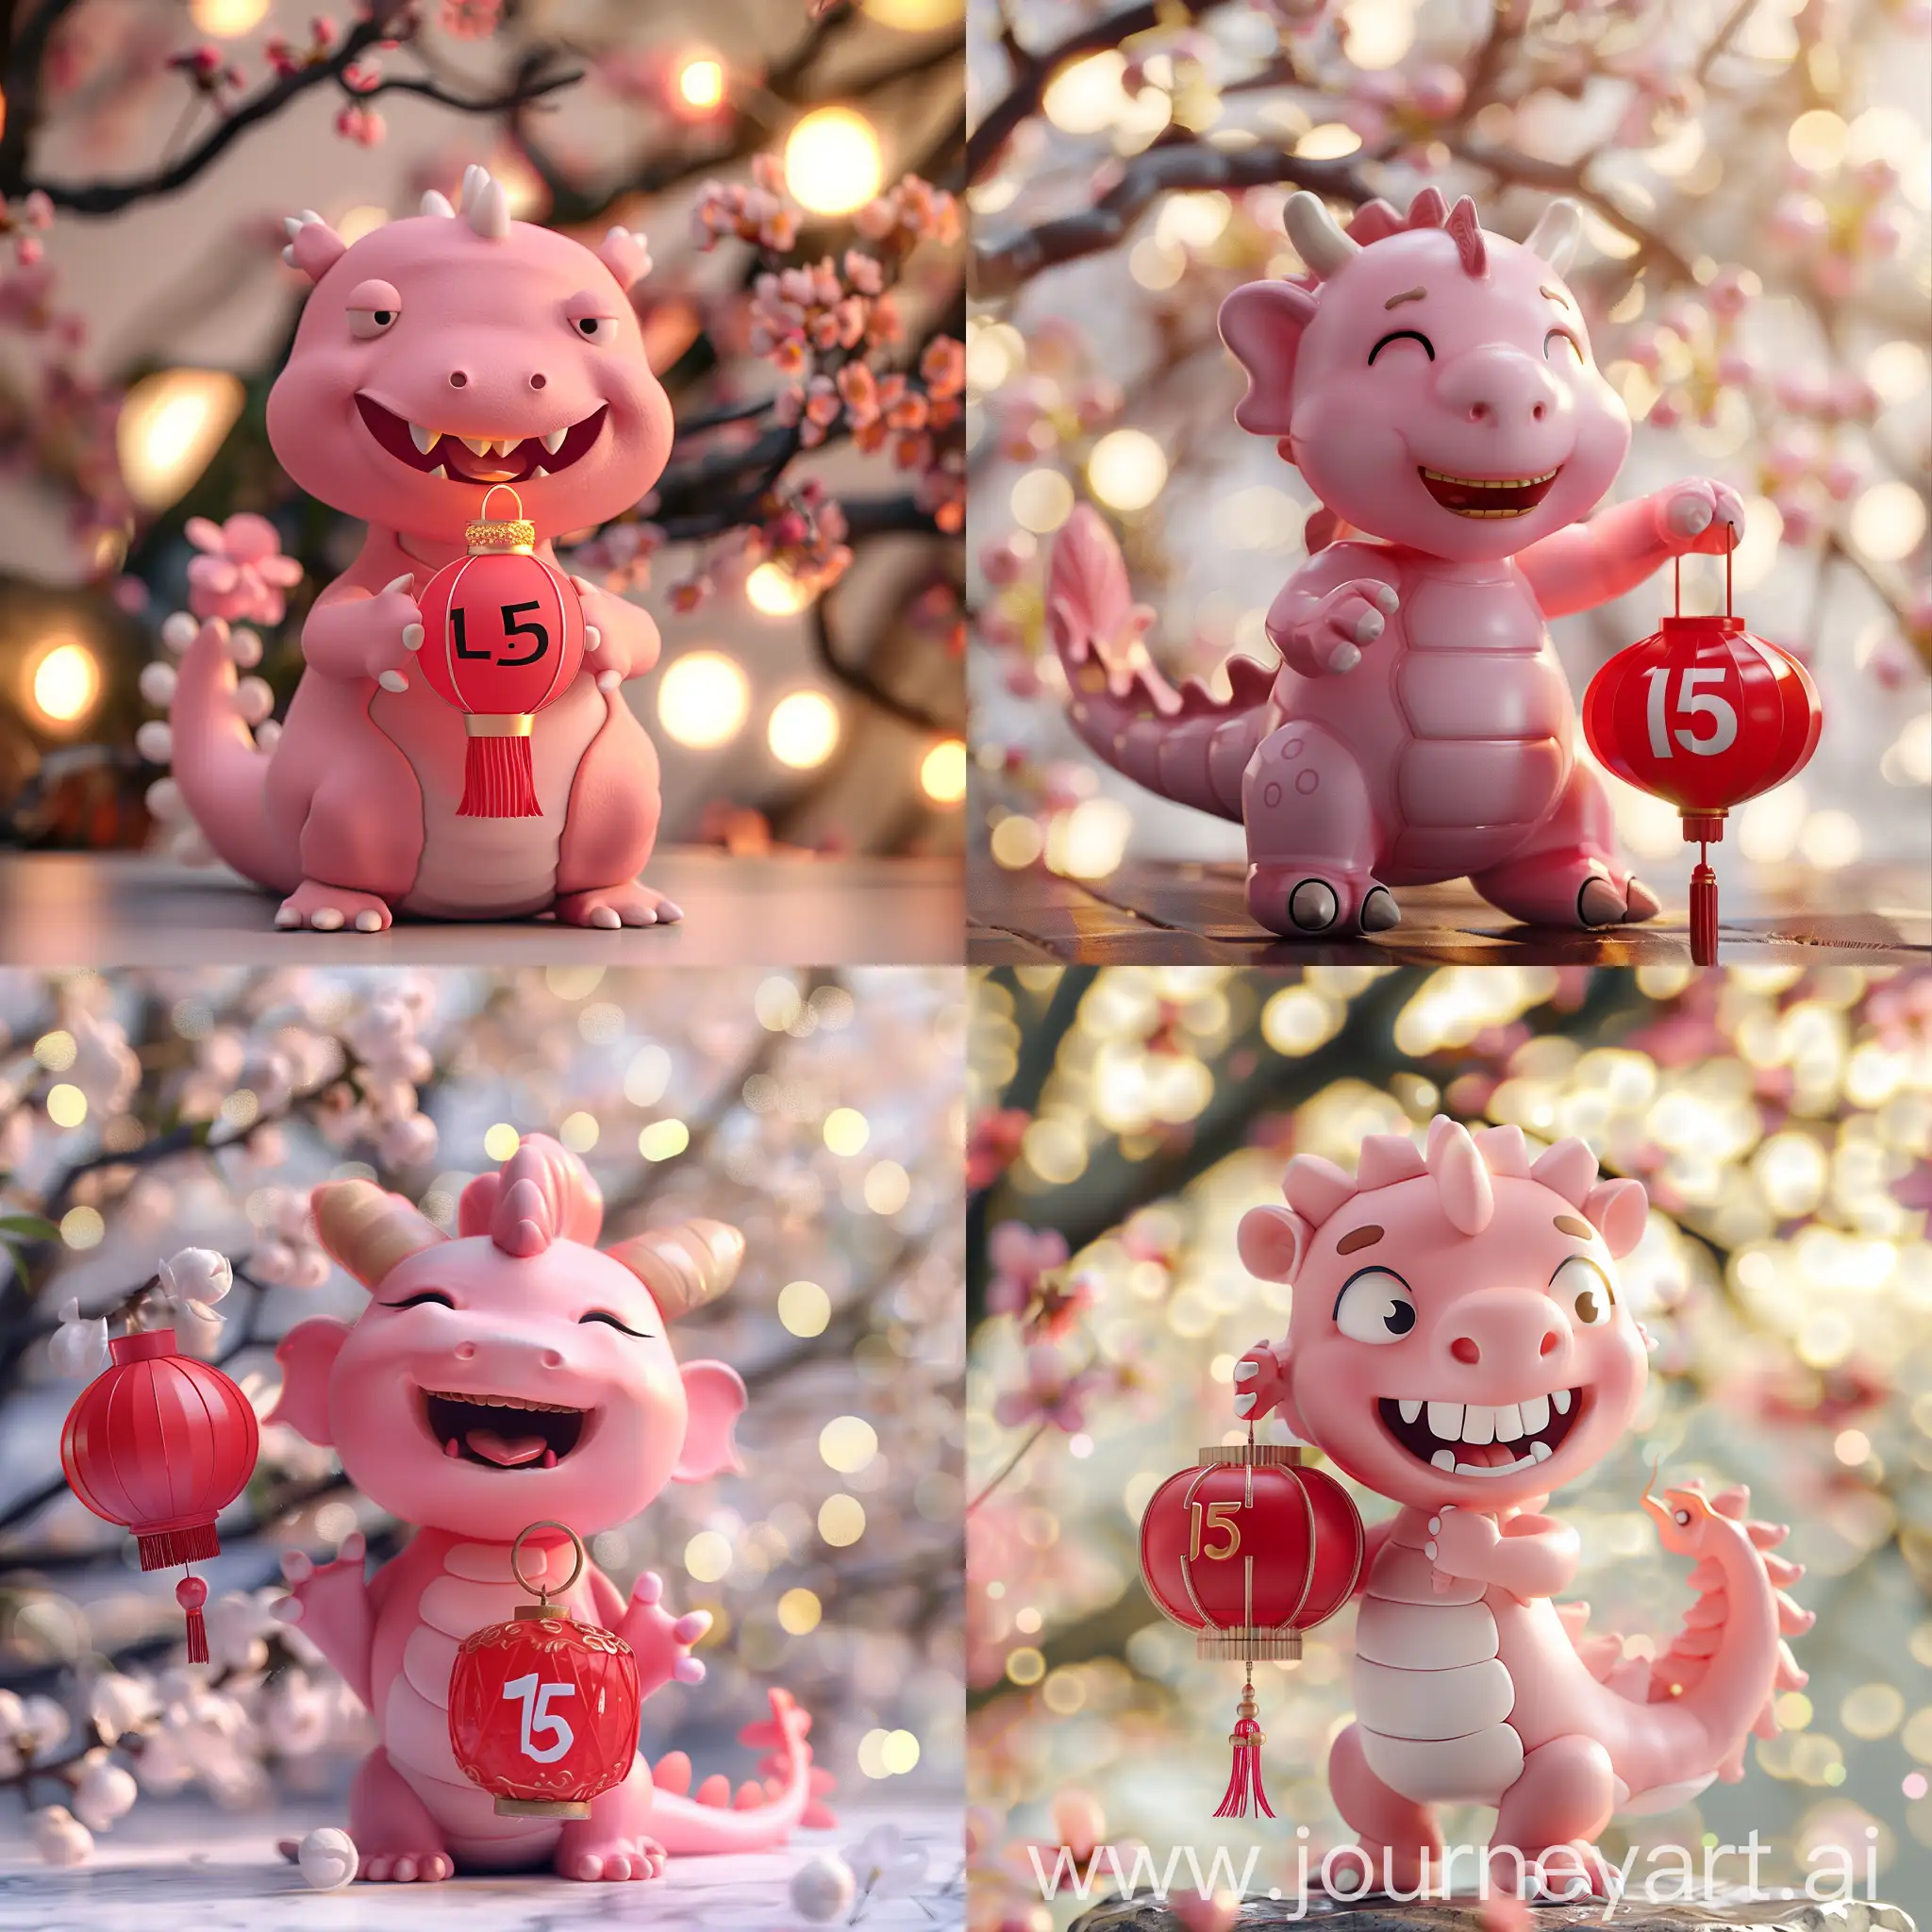 Adorable-3D-Chinese-Kid-Dragon-Celebrating-15th-Birthday-with-Red-Lantern-in-Spring-Blossoms